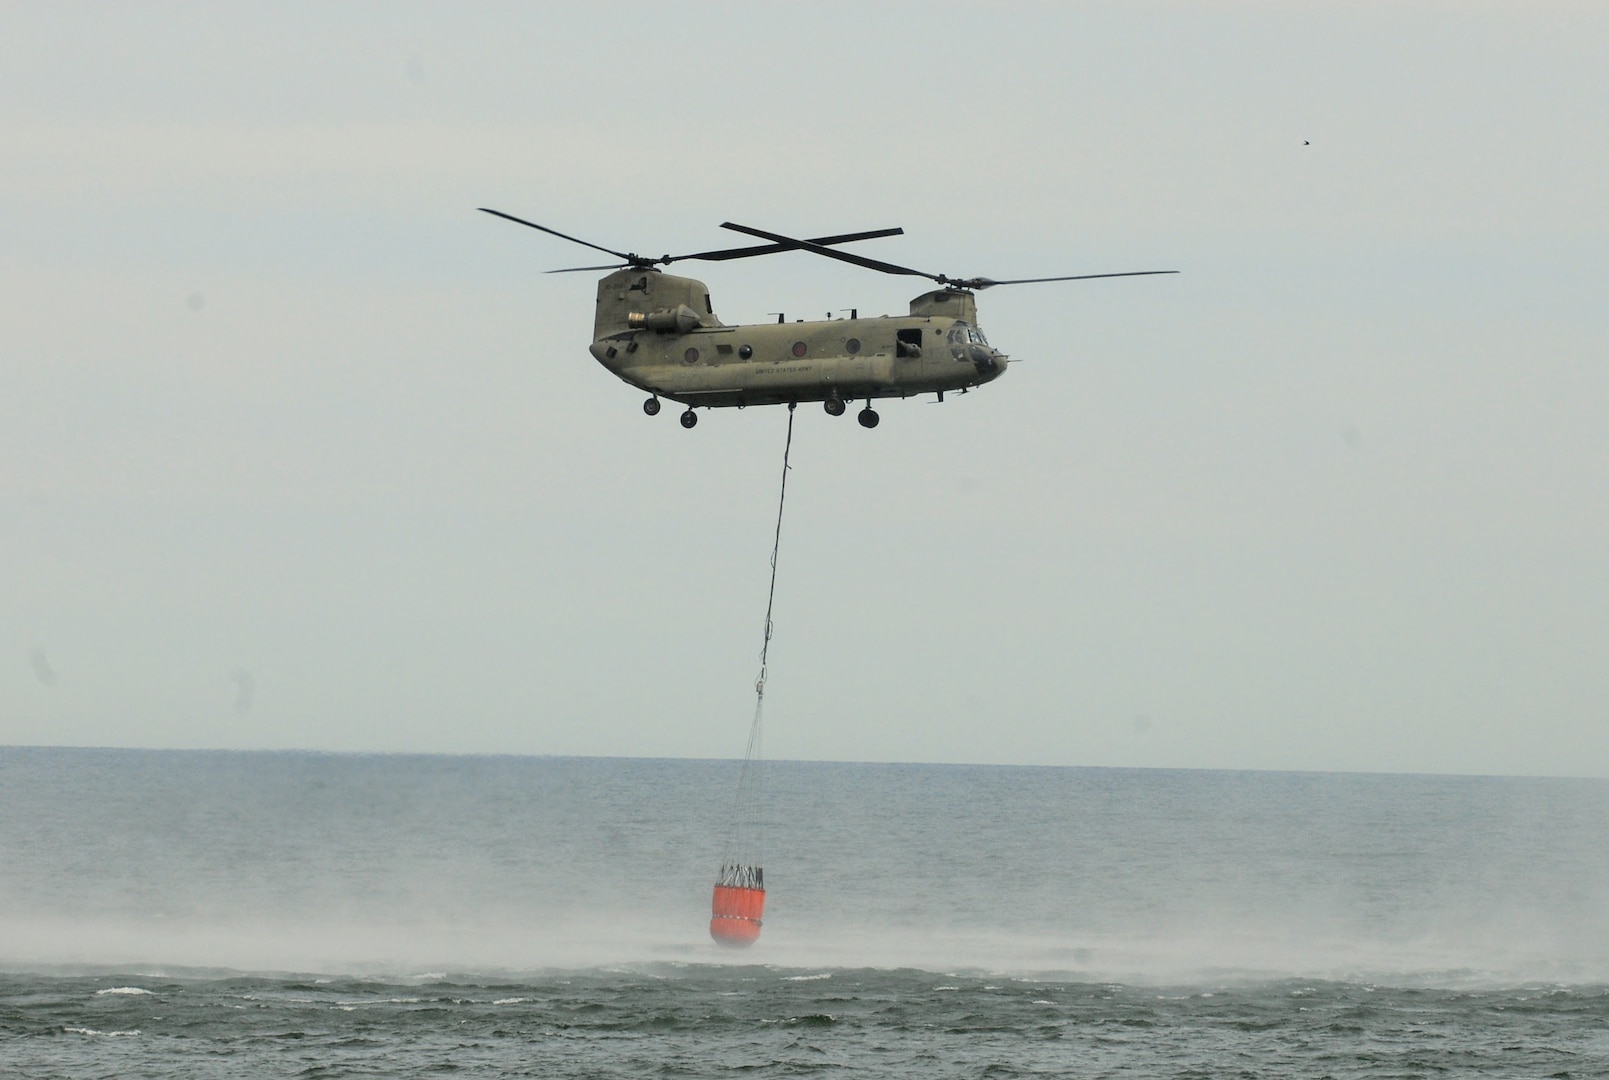 A New York Army National Guard CH-47 Chinook helicopter hauls 2,000 gallons of water out of Lake Ontario in a bucket near Hamlin, New York, May 6, 2020. The Chinook's pilots and crew were practicing scooping and dumping water in preparation for firefighting missions.